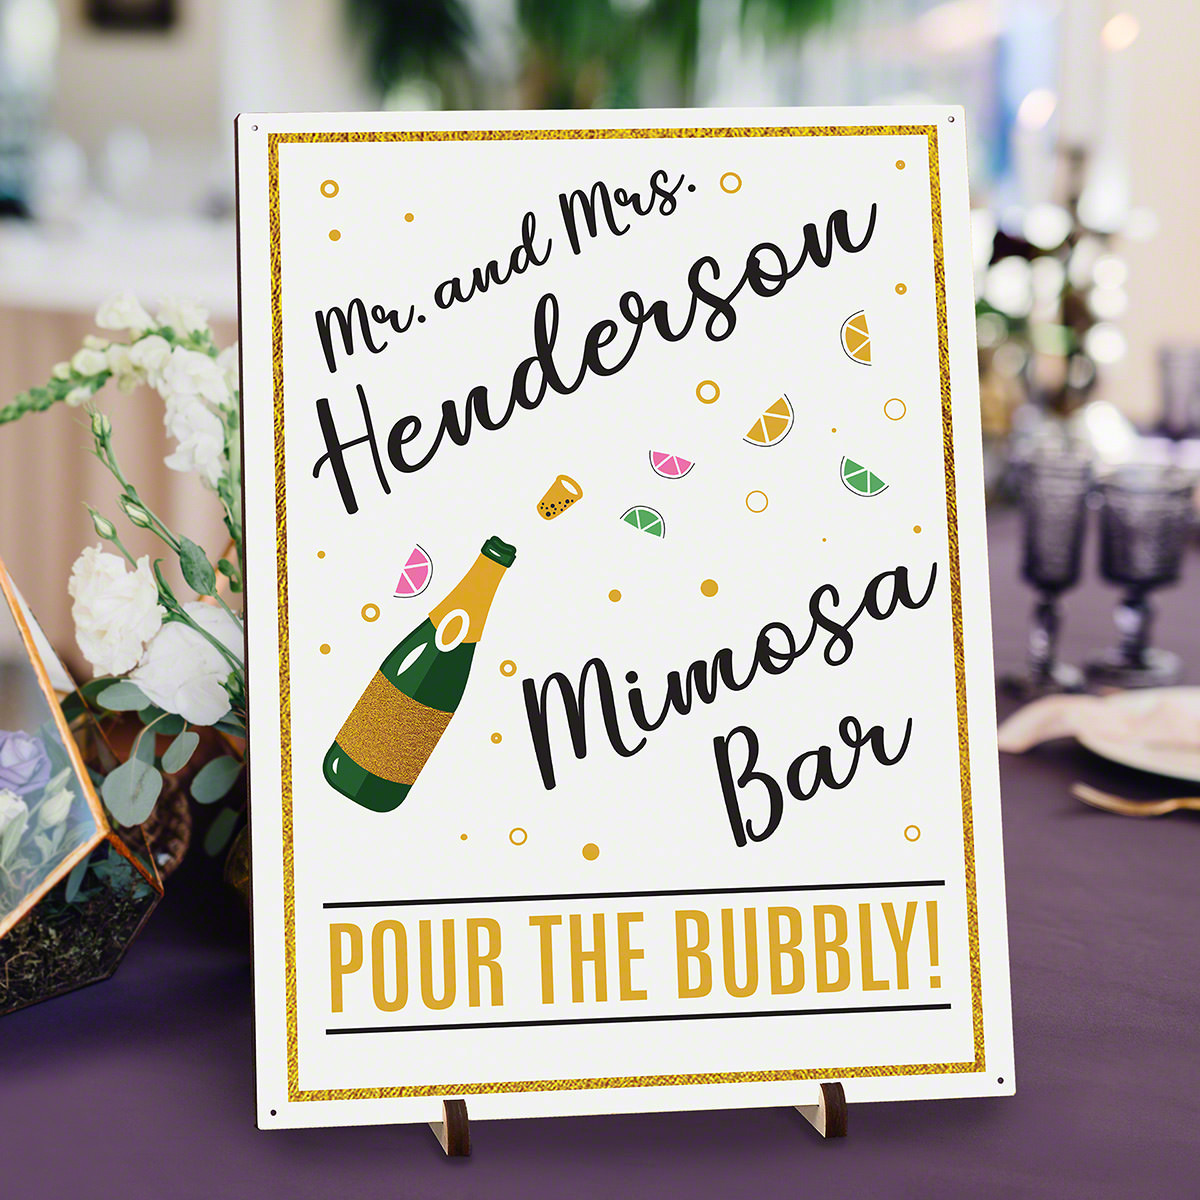 Why stop at champagne when you could add juice and make delicious mimosas to serve your wedding guests? This adorable personalized mimosa bar sign is the perfect piece of decor for your wedding reception. Your guests will love having fruity mimosas with y #bar